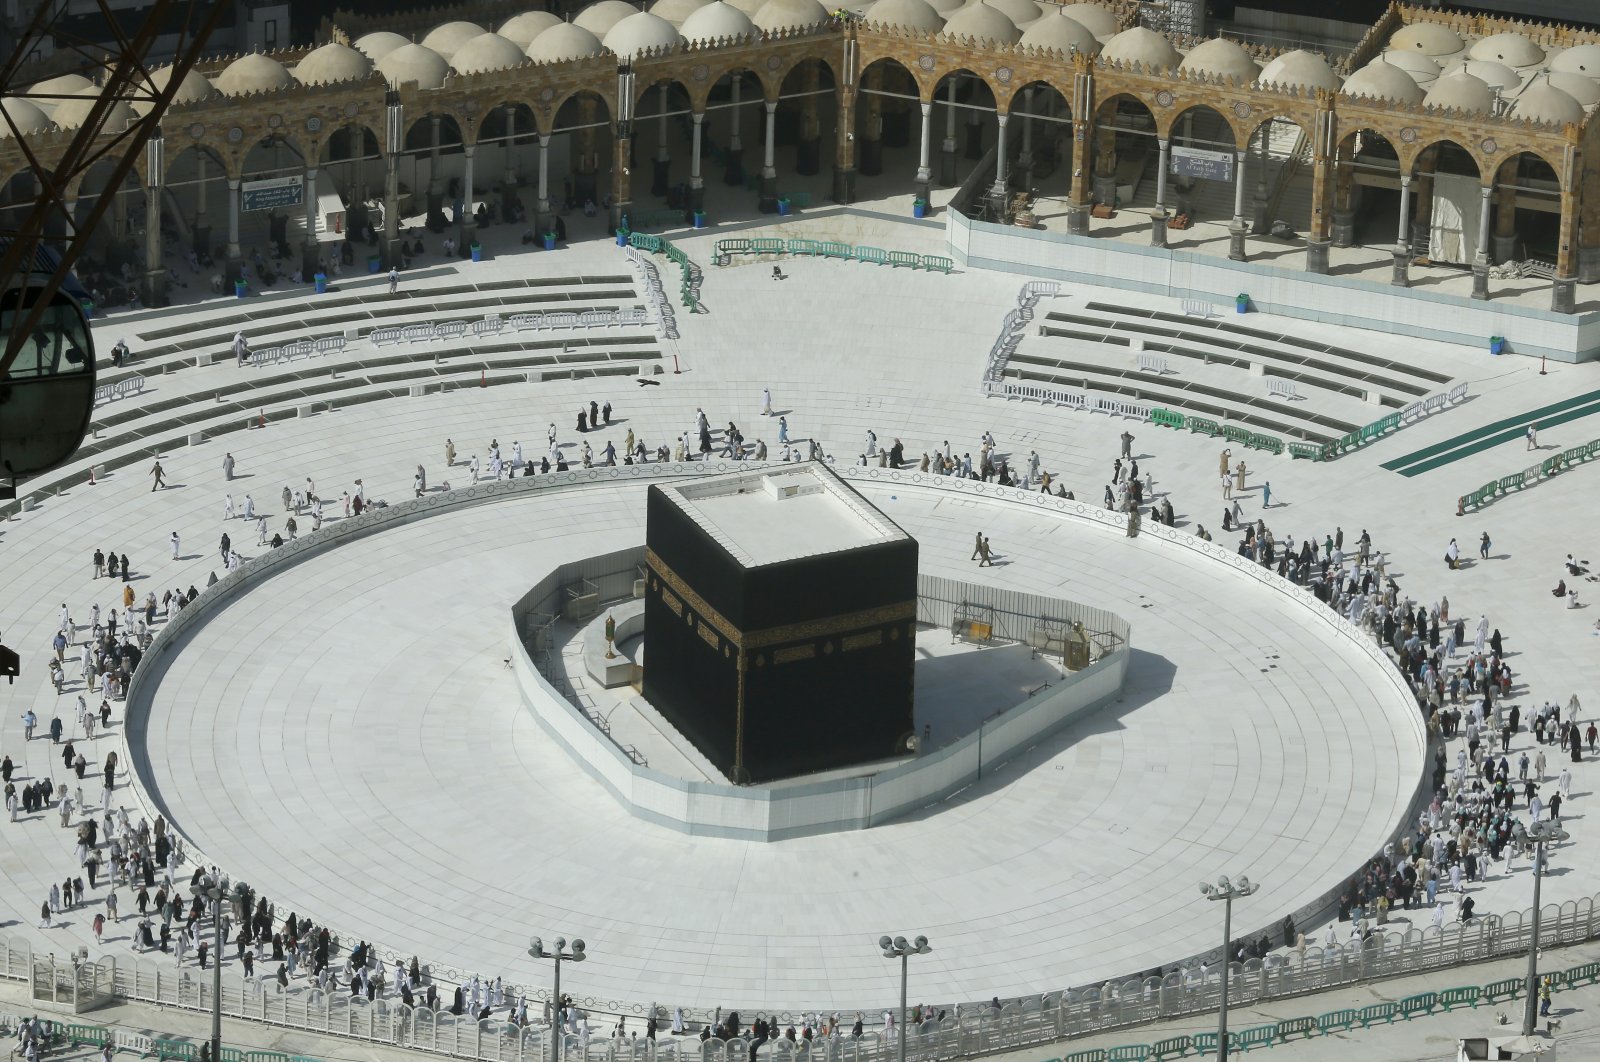 Muslims circumambulate the Kaaba, the cubic building at the Grand Mosque, in the Muslim holy city of Mecca, Saudi Arabia, Saturday, March 7, 2020. (AP Photo)